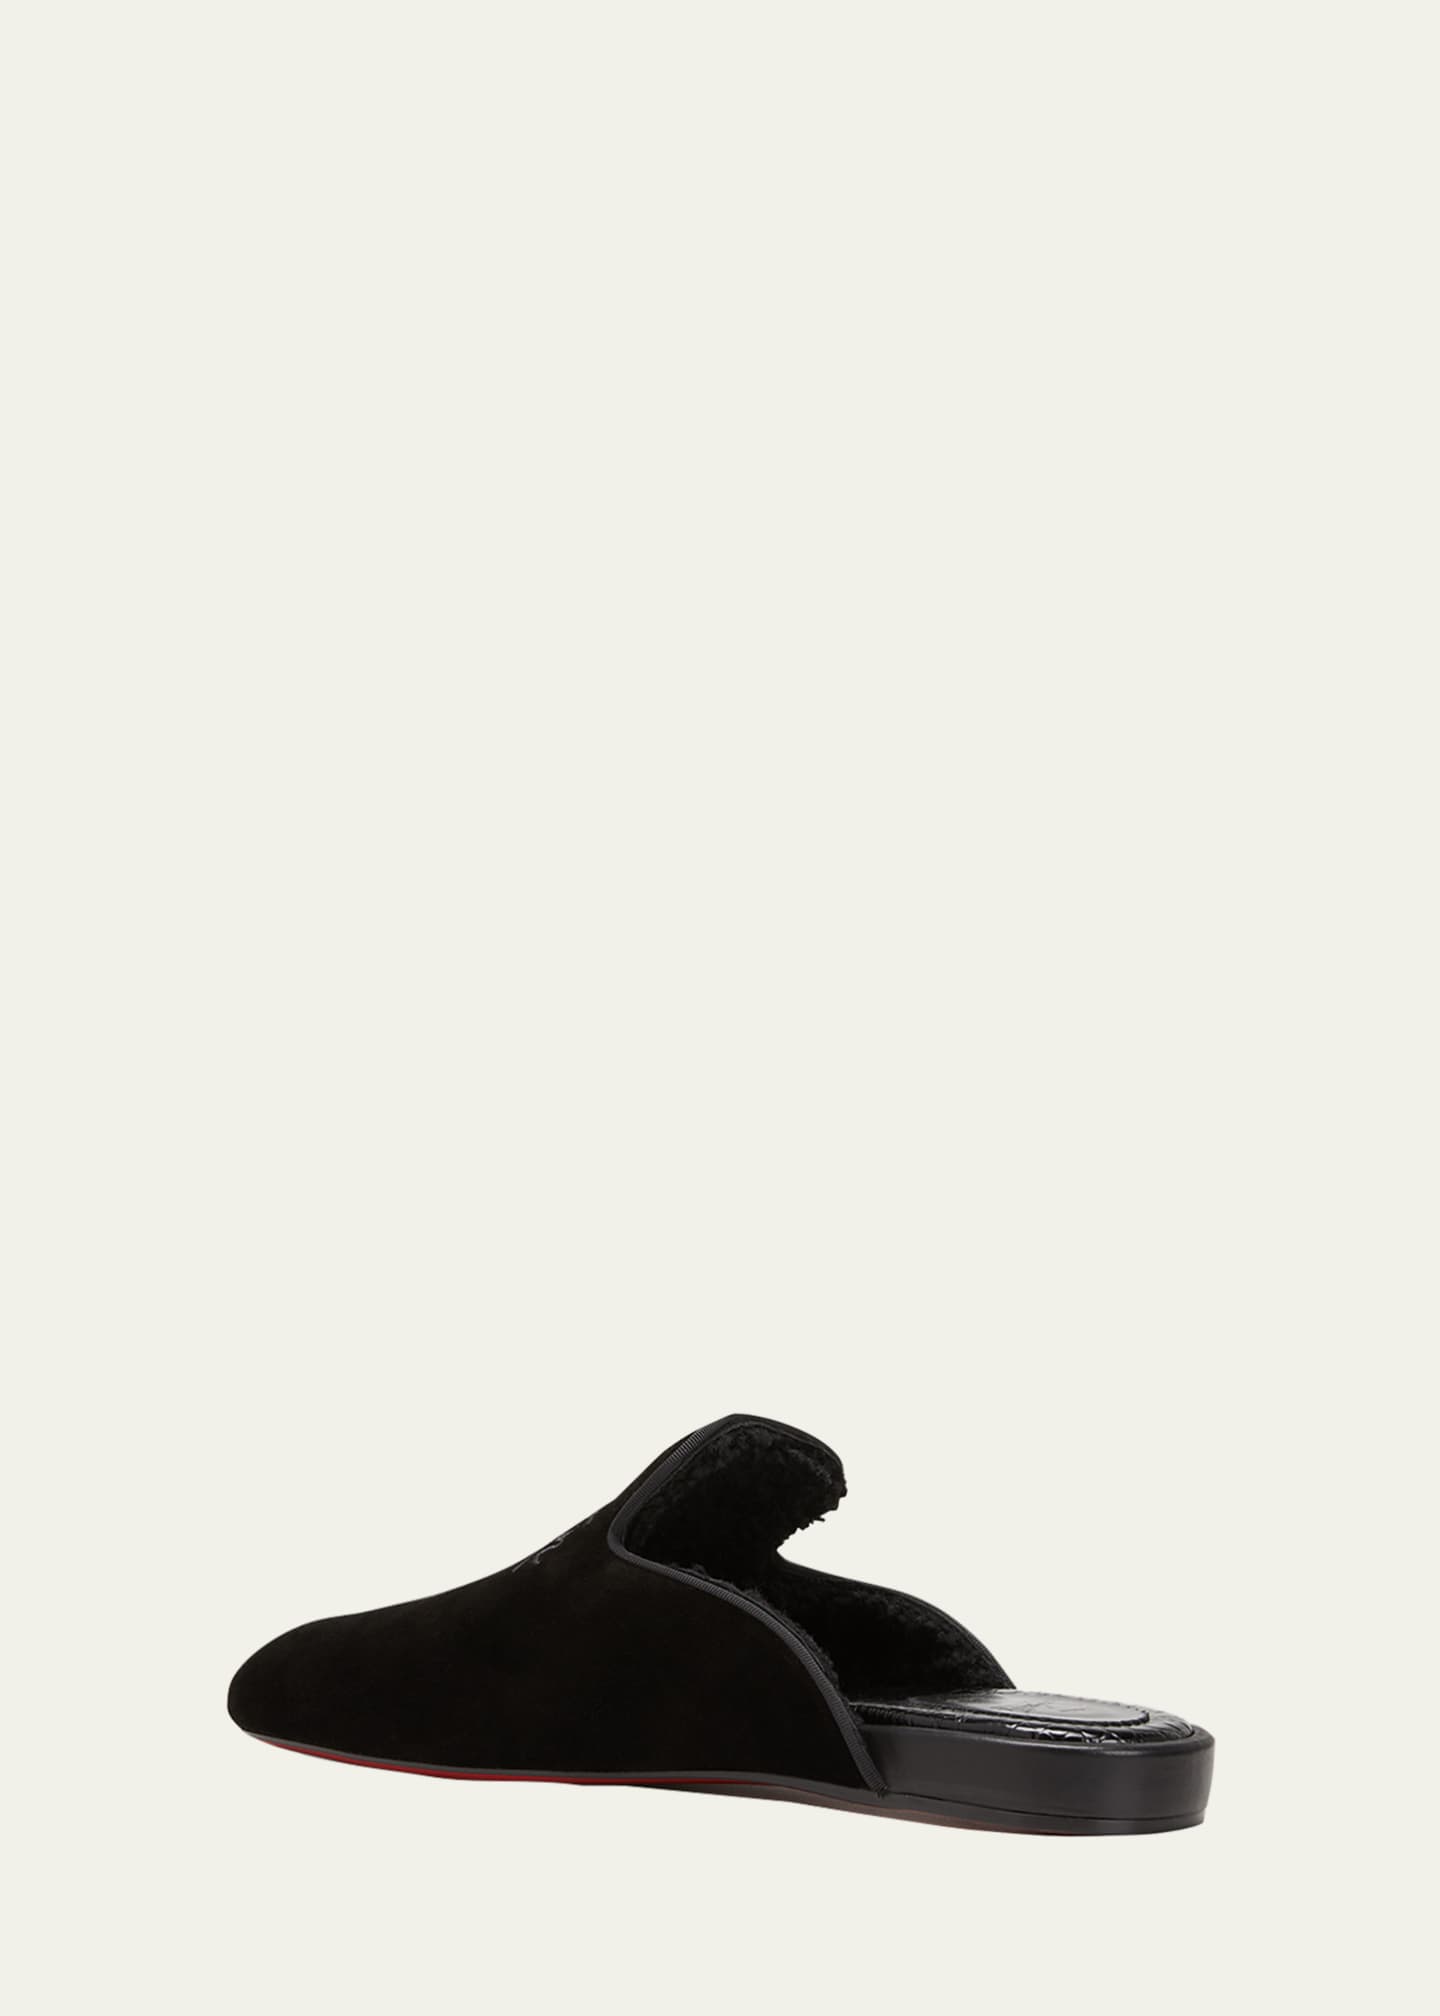 Christian Louboutin Coolito Embroidered Logo Slipper Mule in Black at Nordstrom, Size 9Us